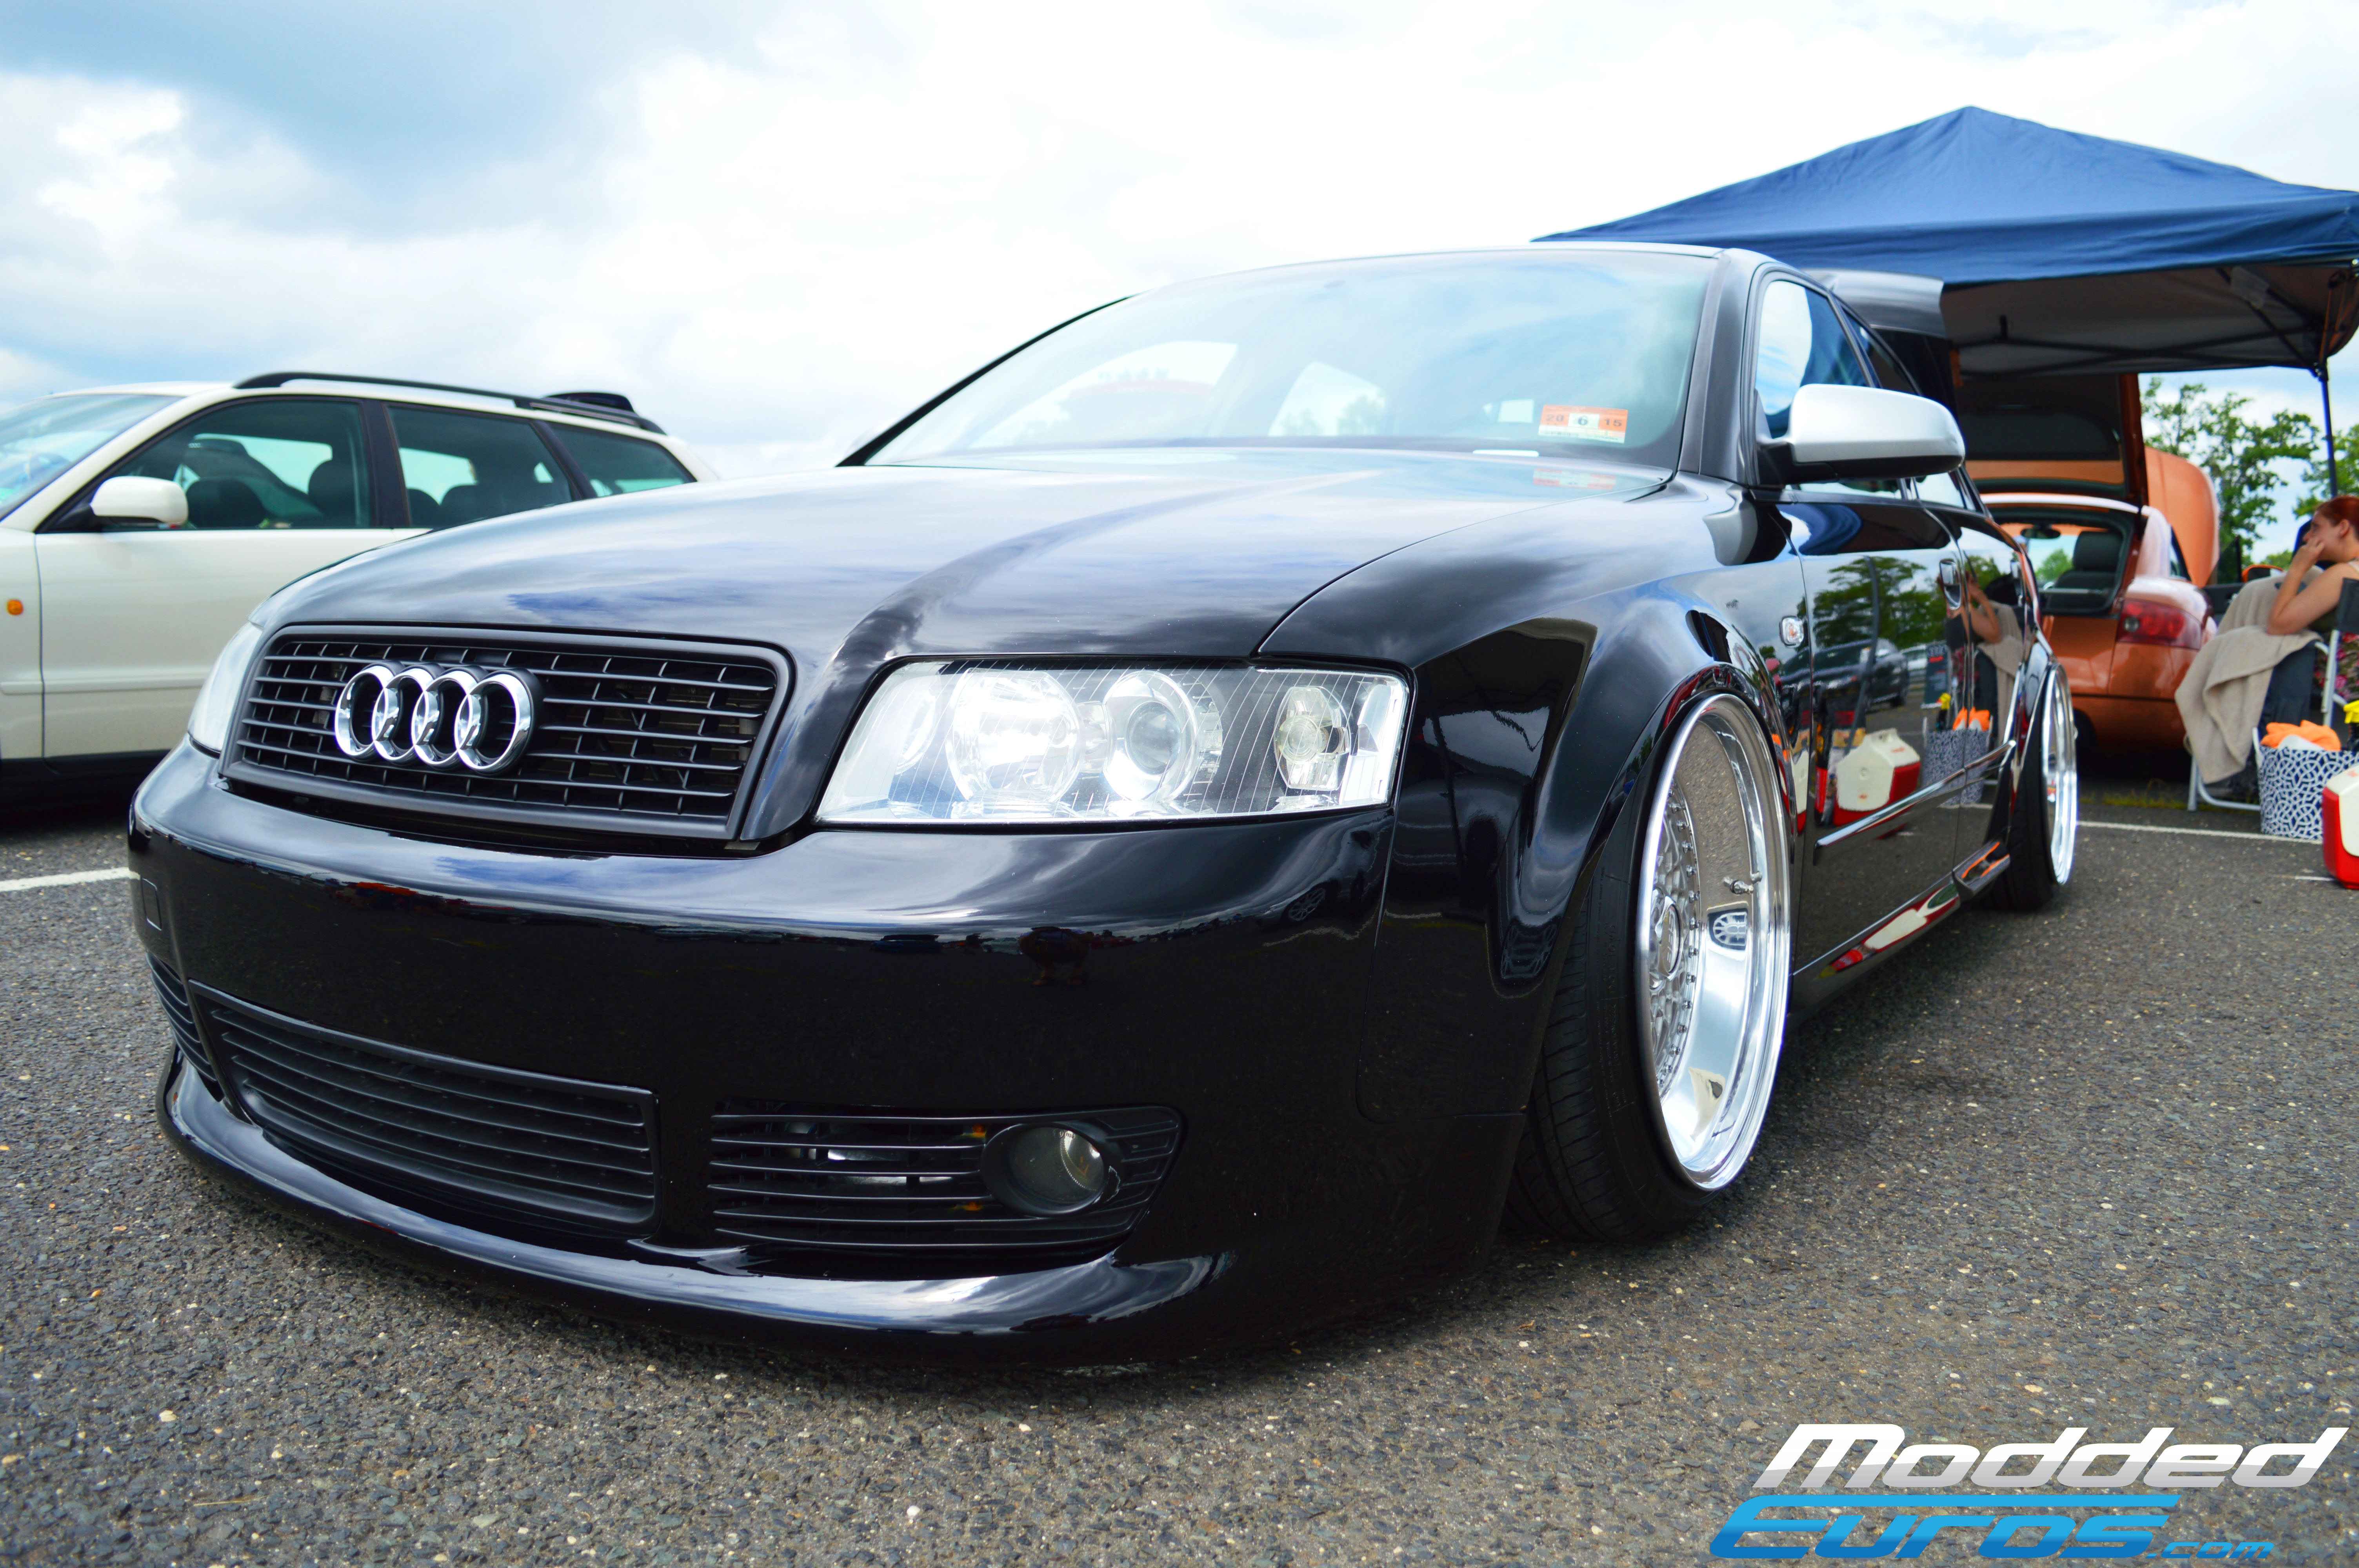 Audi tuning with suspension, brake system, exhaust system